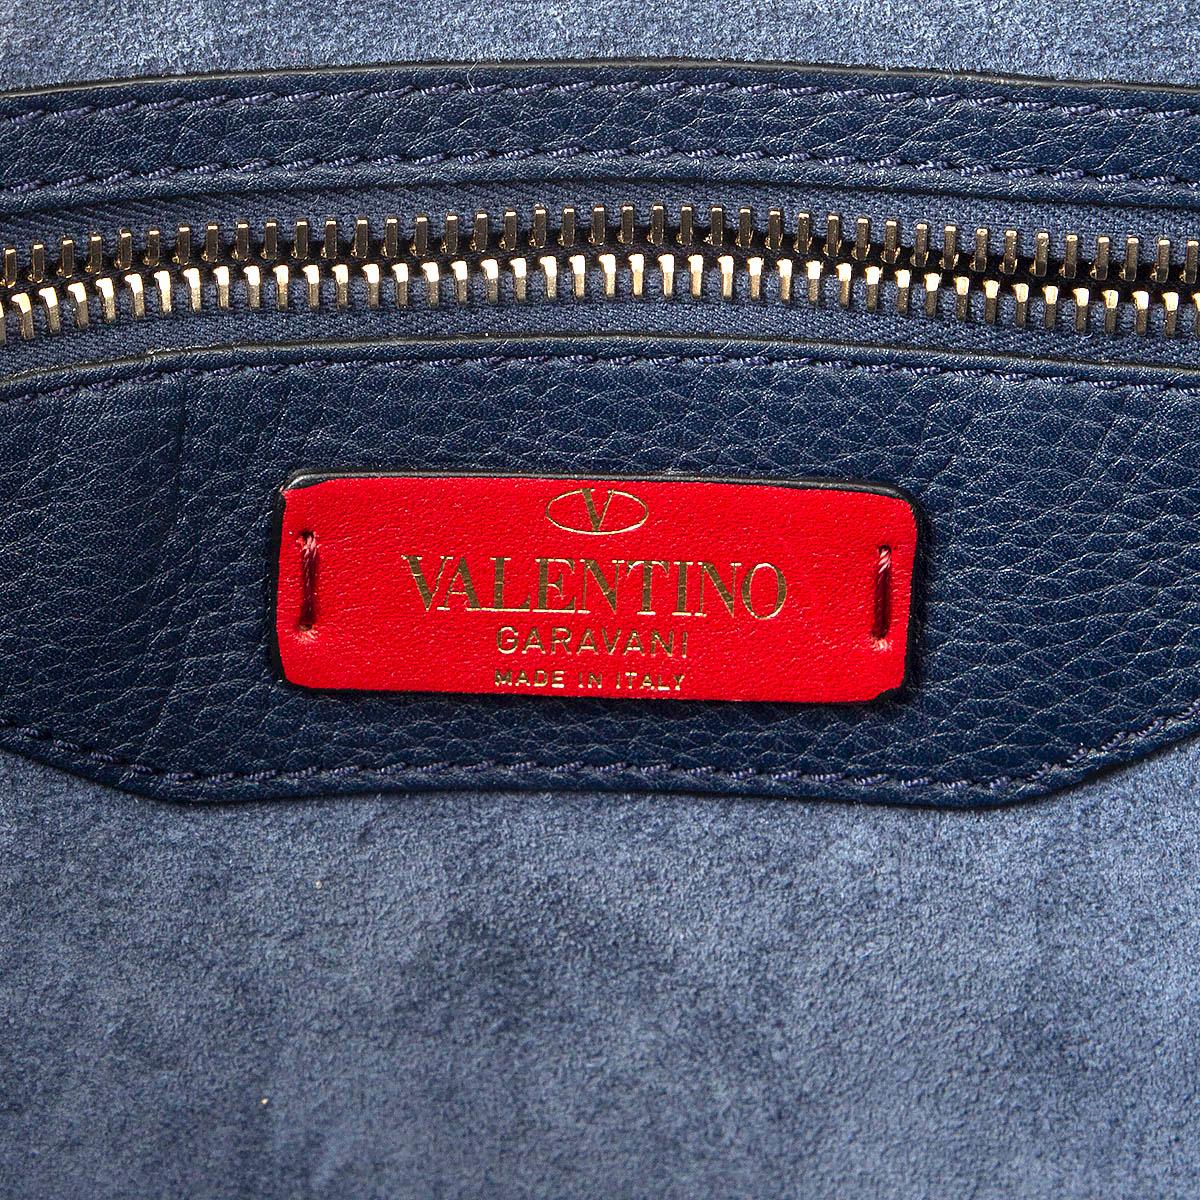 VALENTINO navy blue grainy leather ROCKSTUD Shopping Tote Bag 1